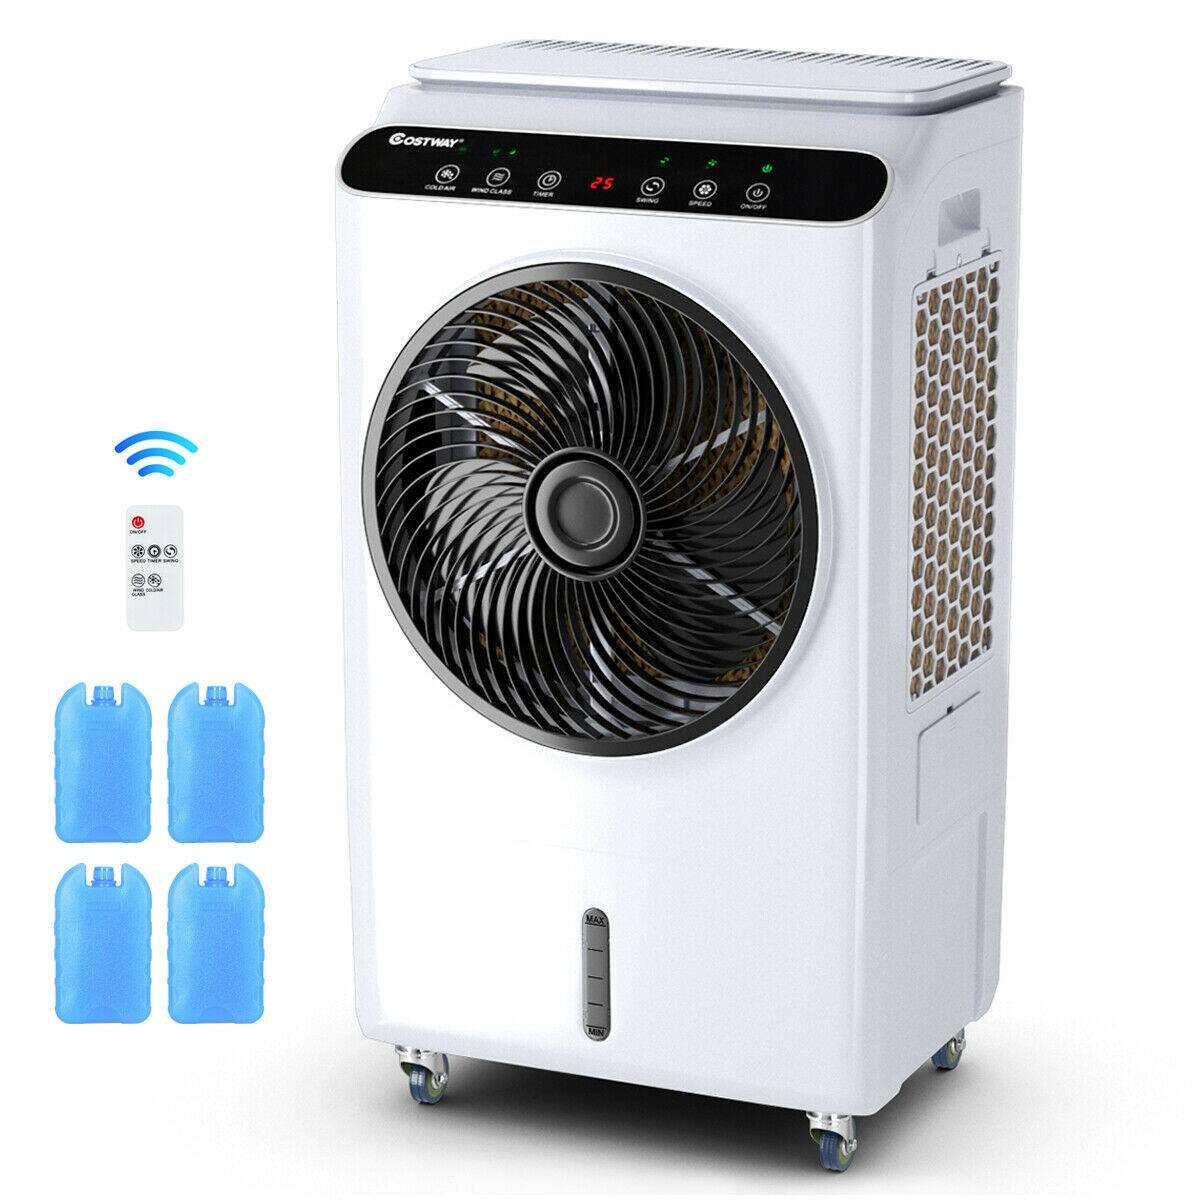 Costway Evaporative Industrial Electric Air Cooler with 3-in-1 multi-function and Remote Control for $175.95 + FS